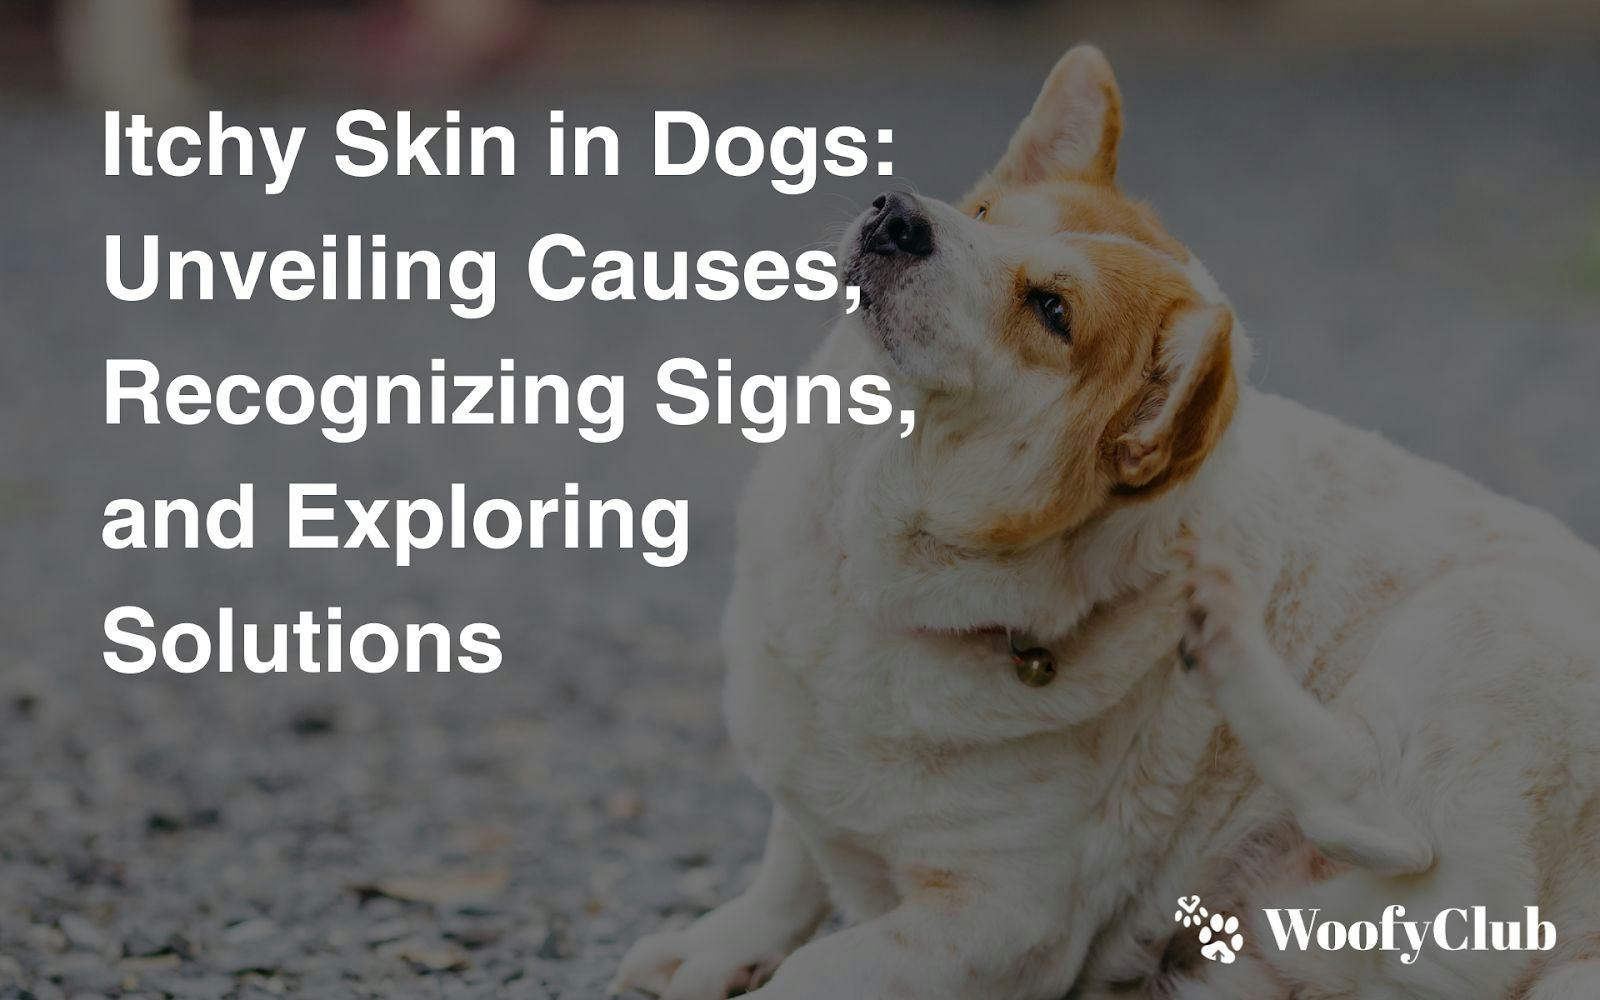 Itchy Skin In Dogs: Unveiling Causes, Recognizing Signs, And Exploring Solutions